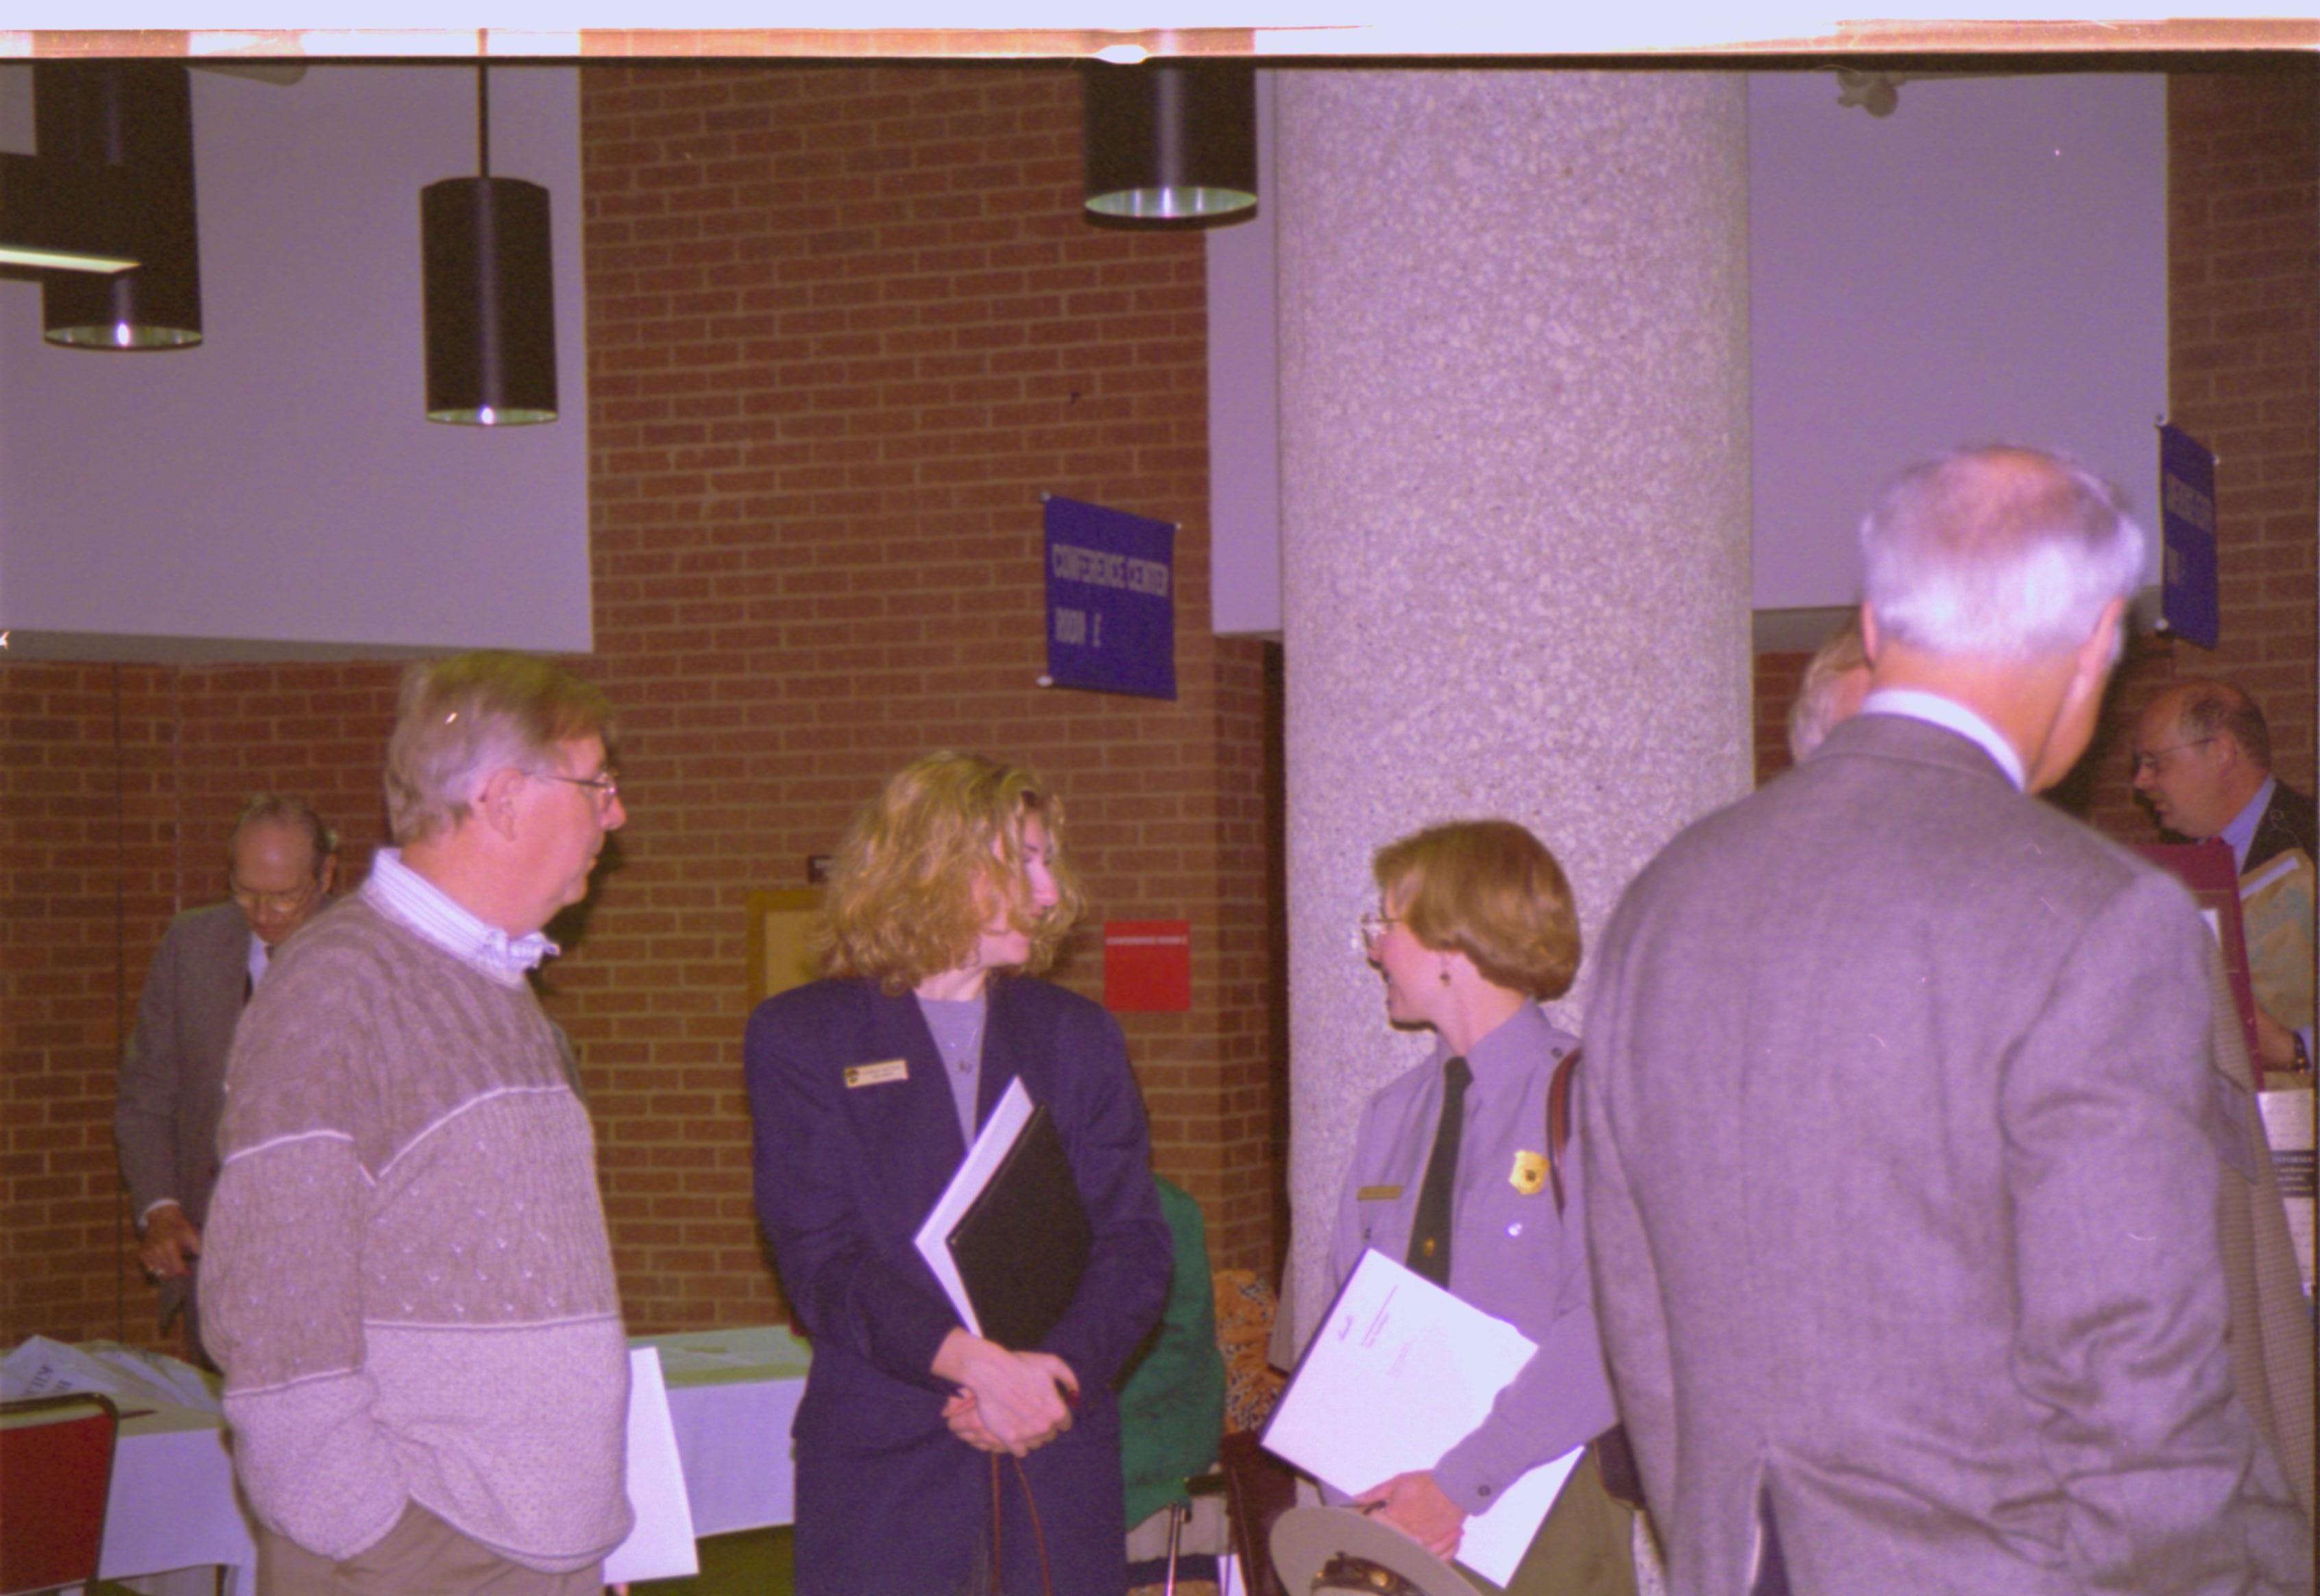 Ranger talking with man and woman in exhibit hall. 3-1997 Colloq (color); 24 Colloquium, 1997